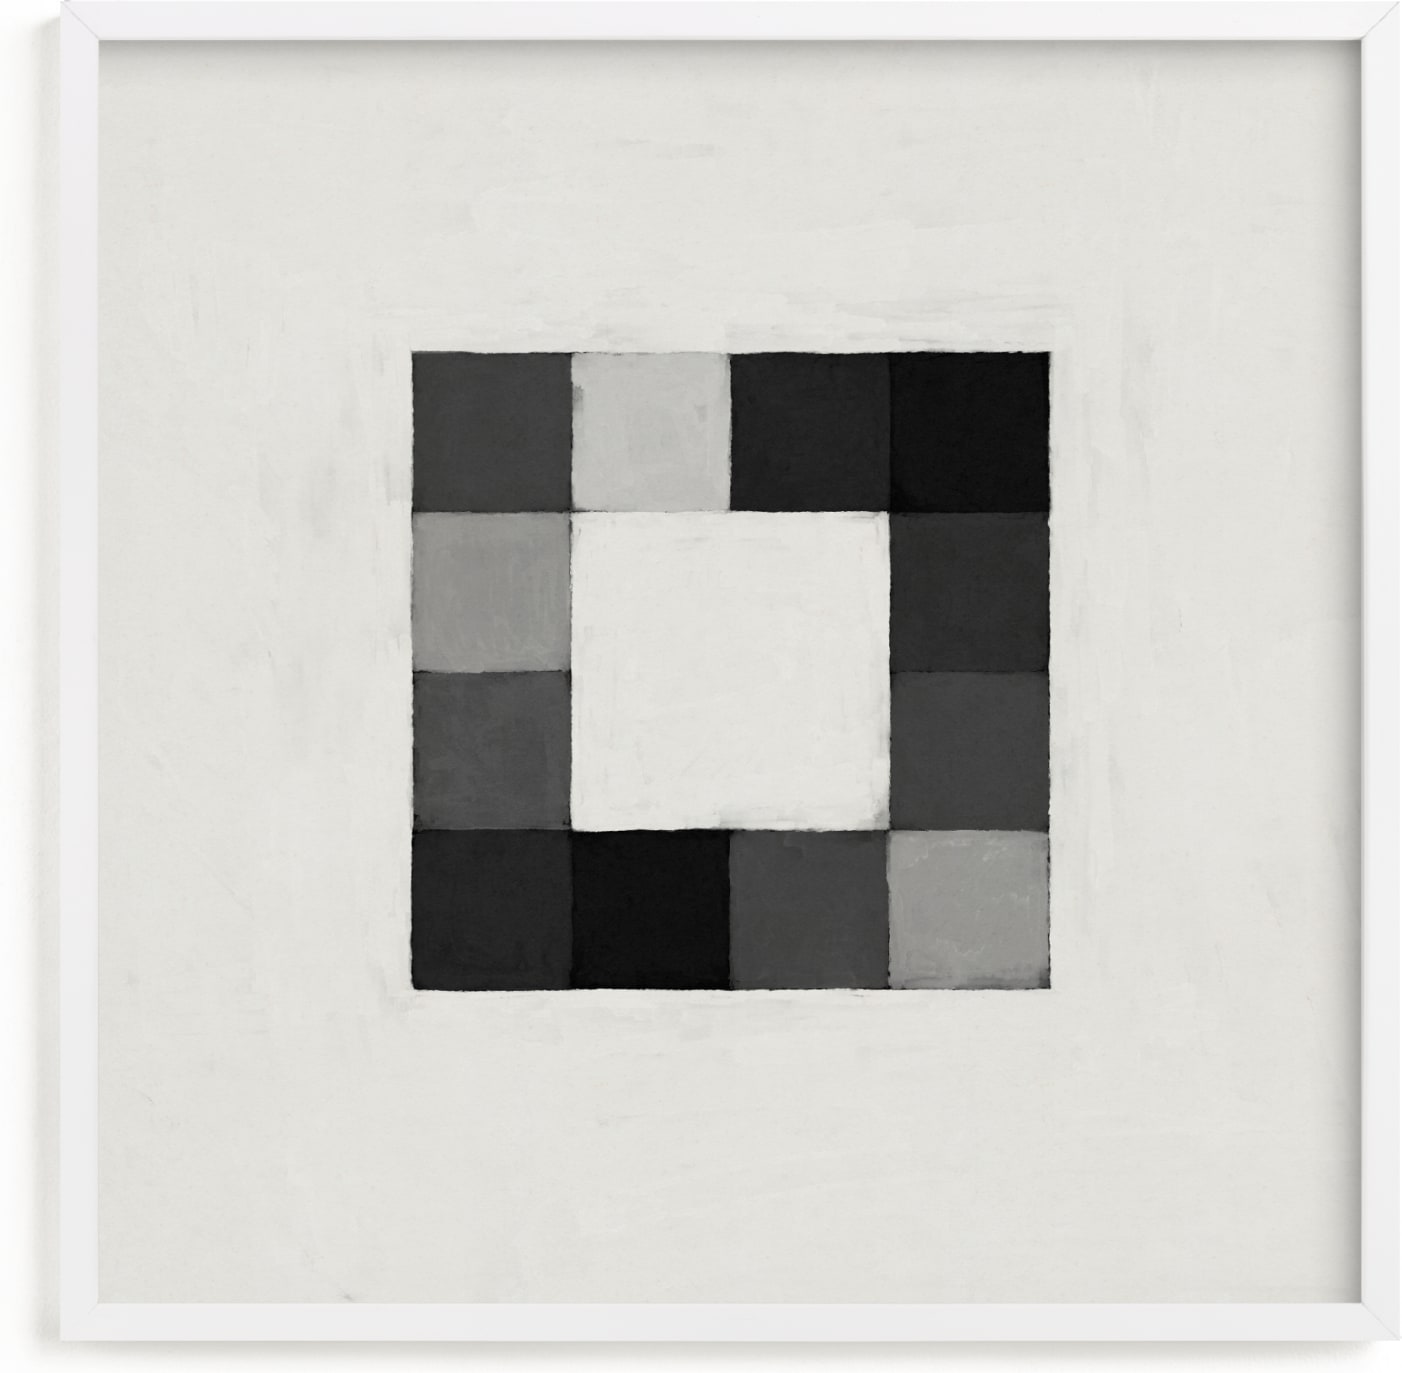 This is a black and white art by Alisa Galitsyna called Squares.